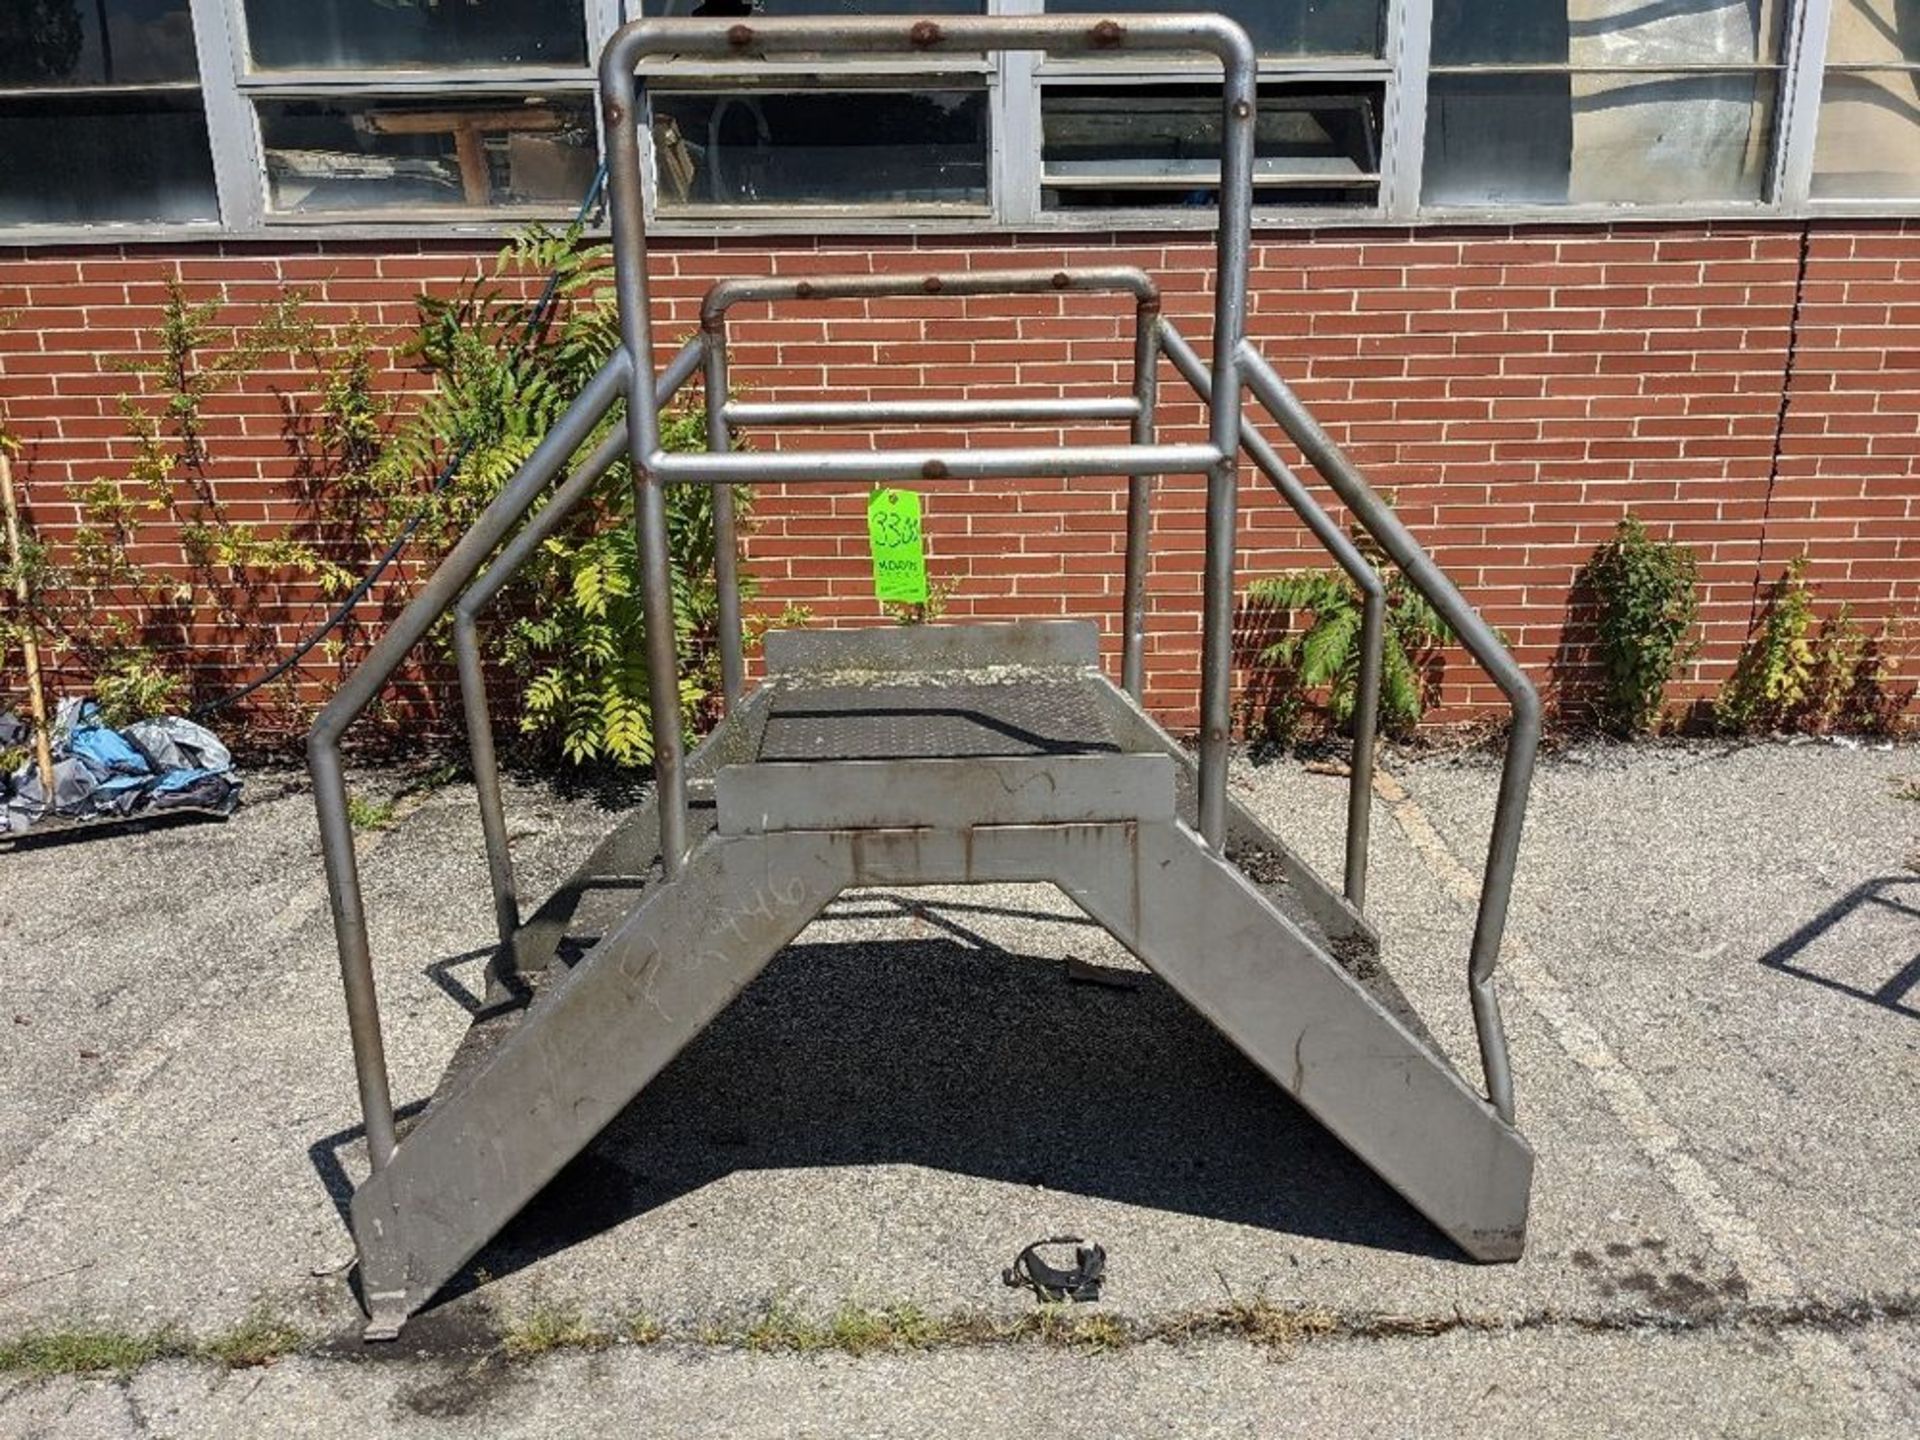 Qty (1) Conveyor Walk over Platform - Stainless steel construction - 4 steps each side - Clearance